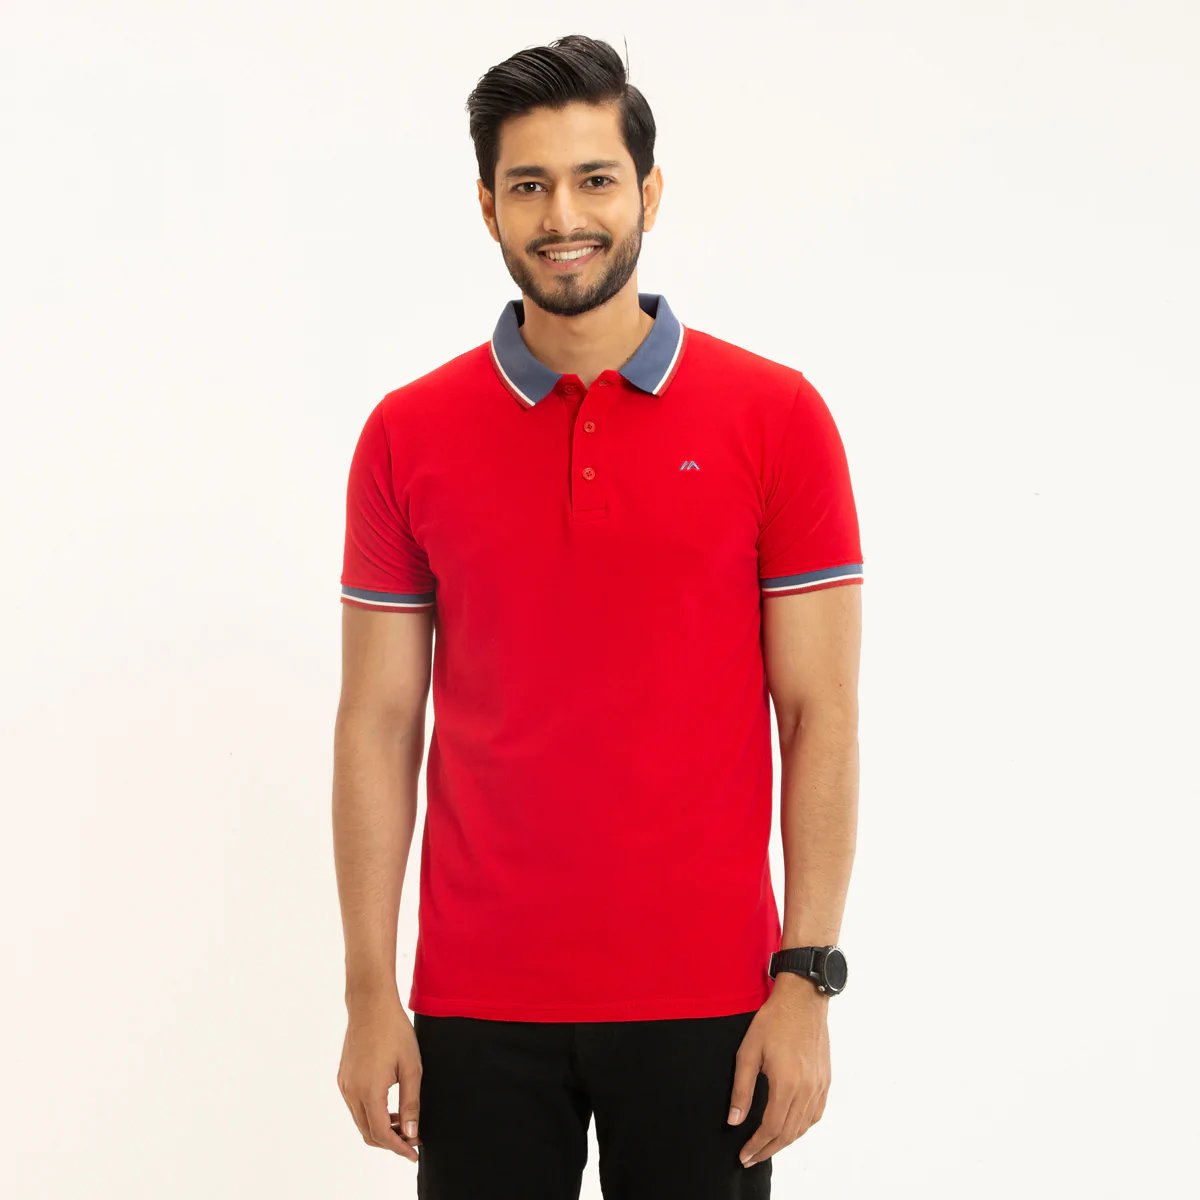 High Quality Men's Polo Shirt in Bangladesh at Affordable Price ...